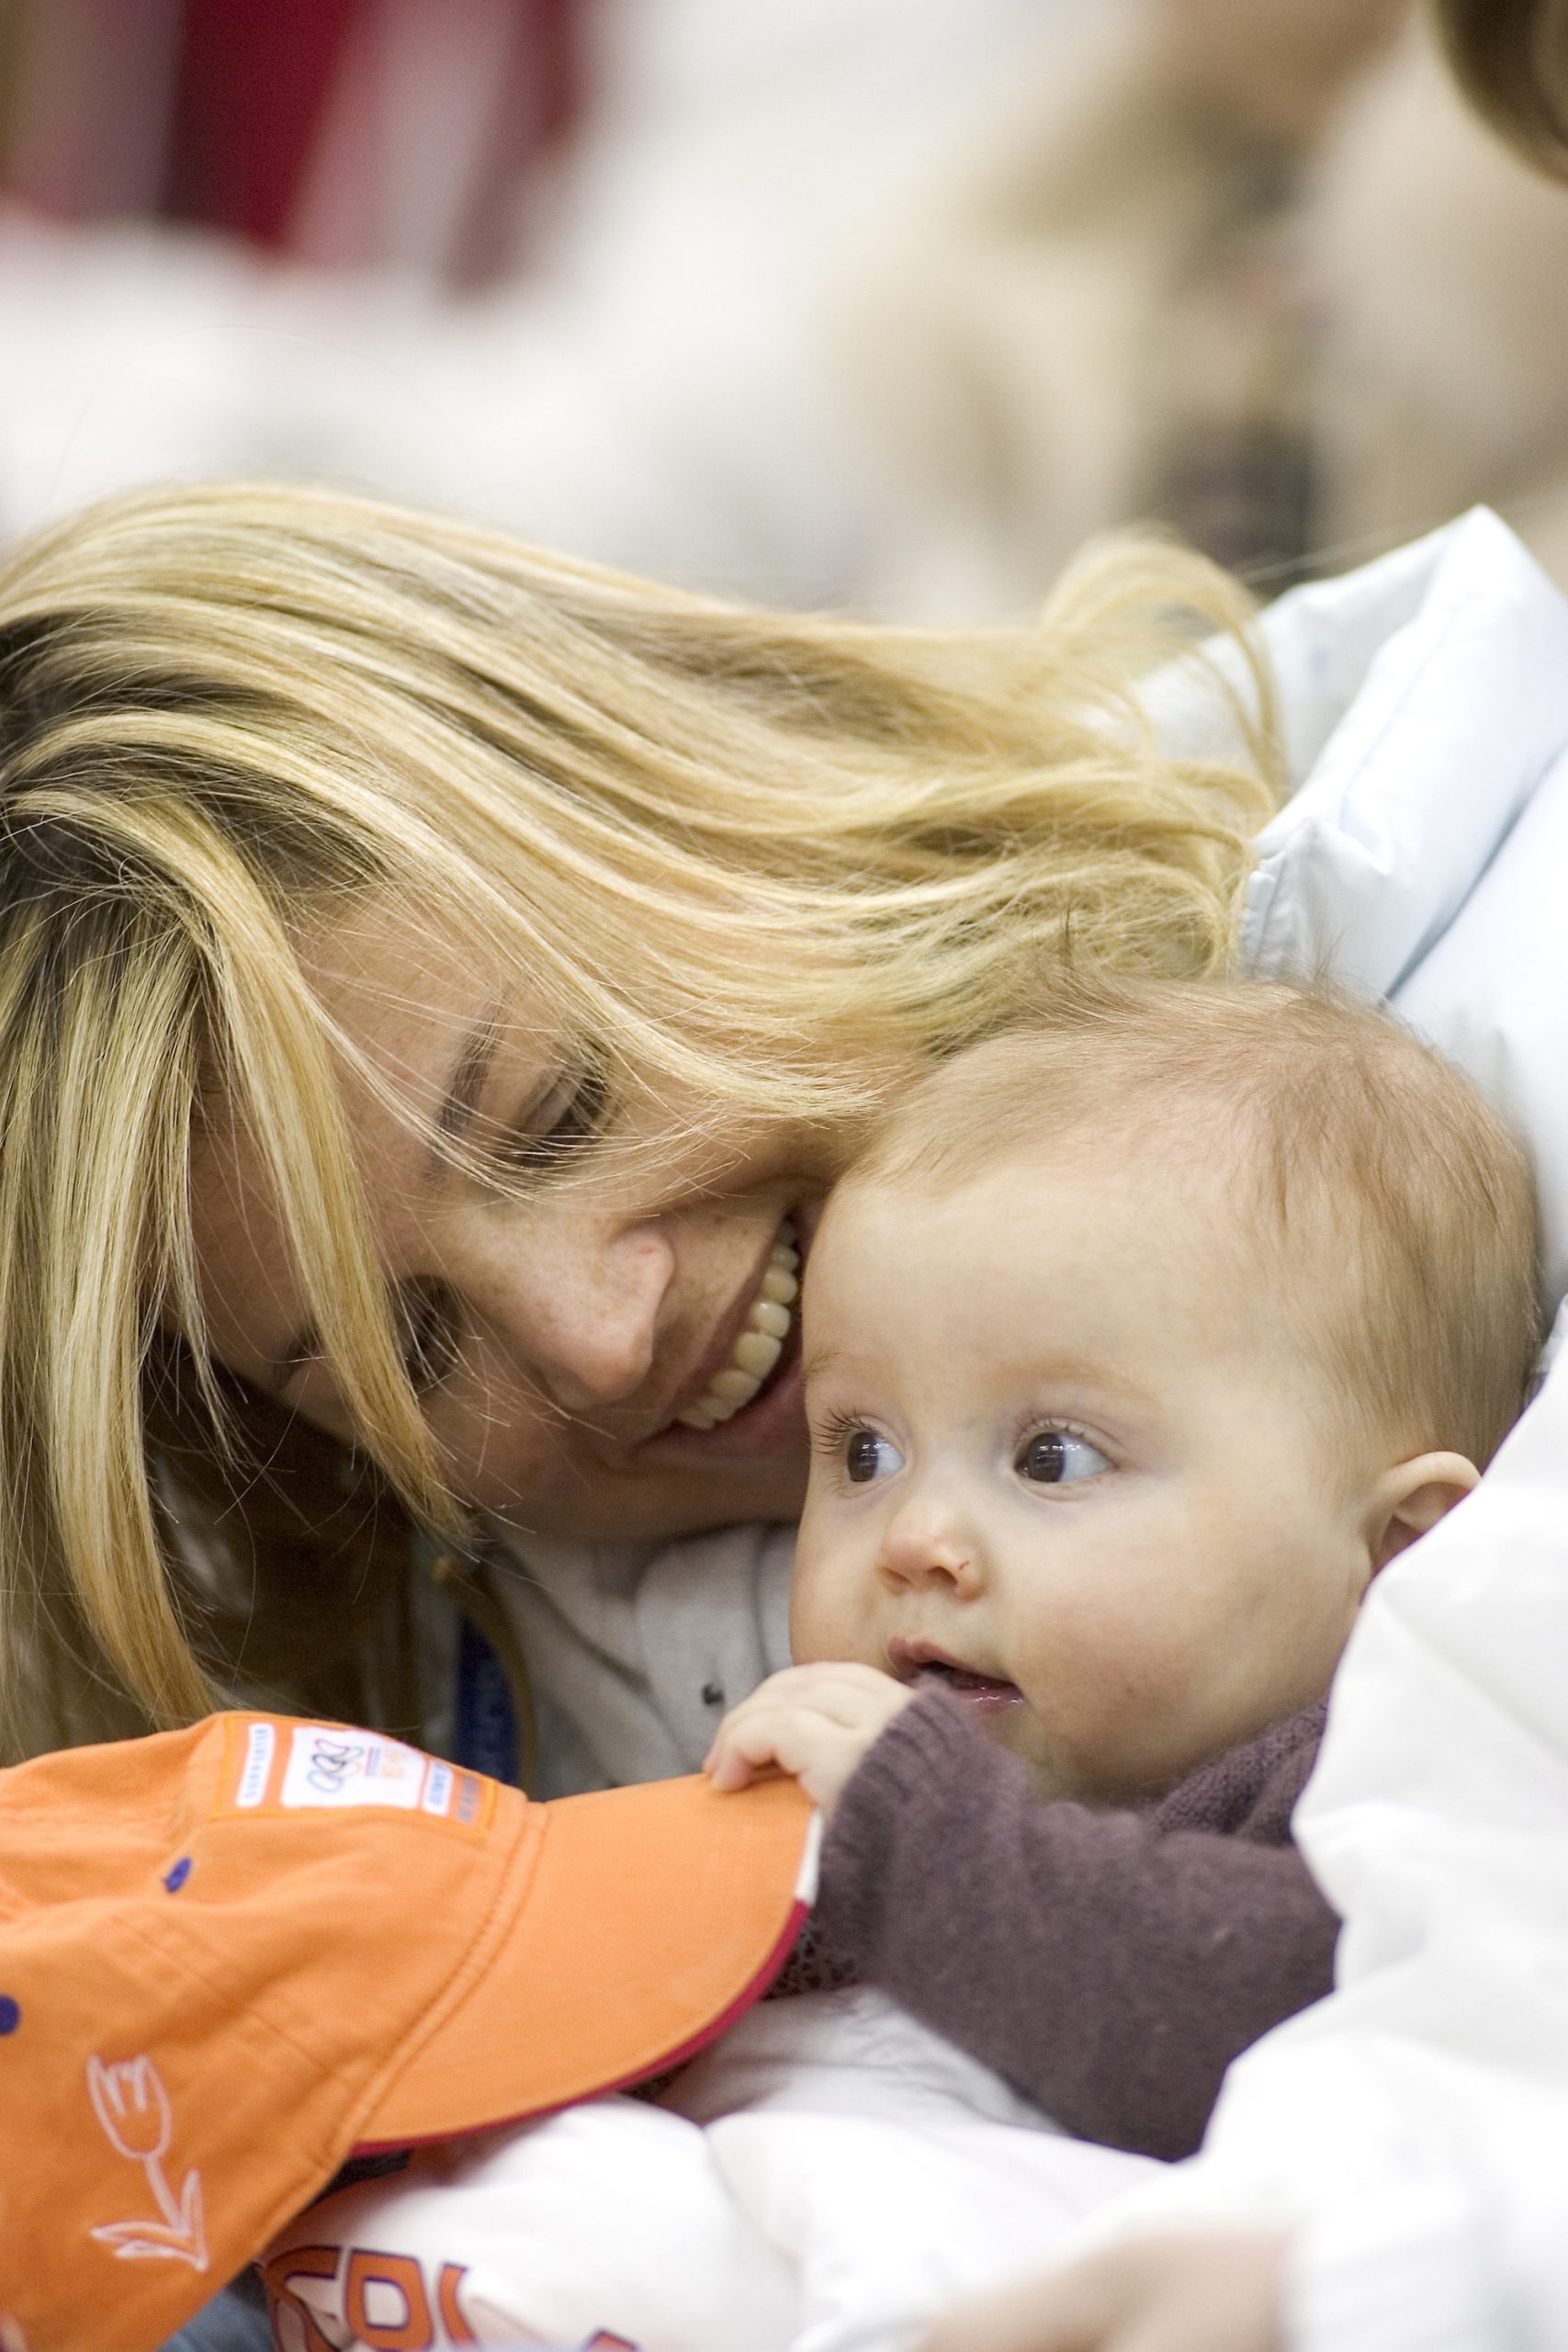 Alexia as a baby on her mother Máxima's lap during the 2006 Winter Olympics in Turin.